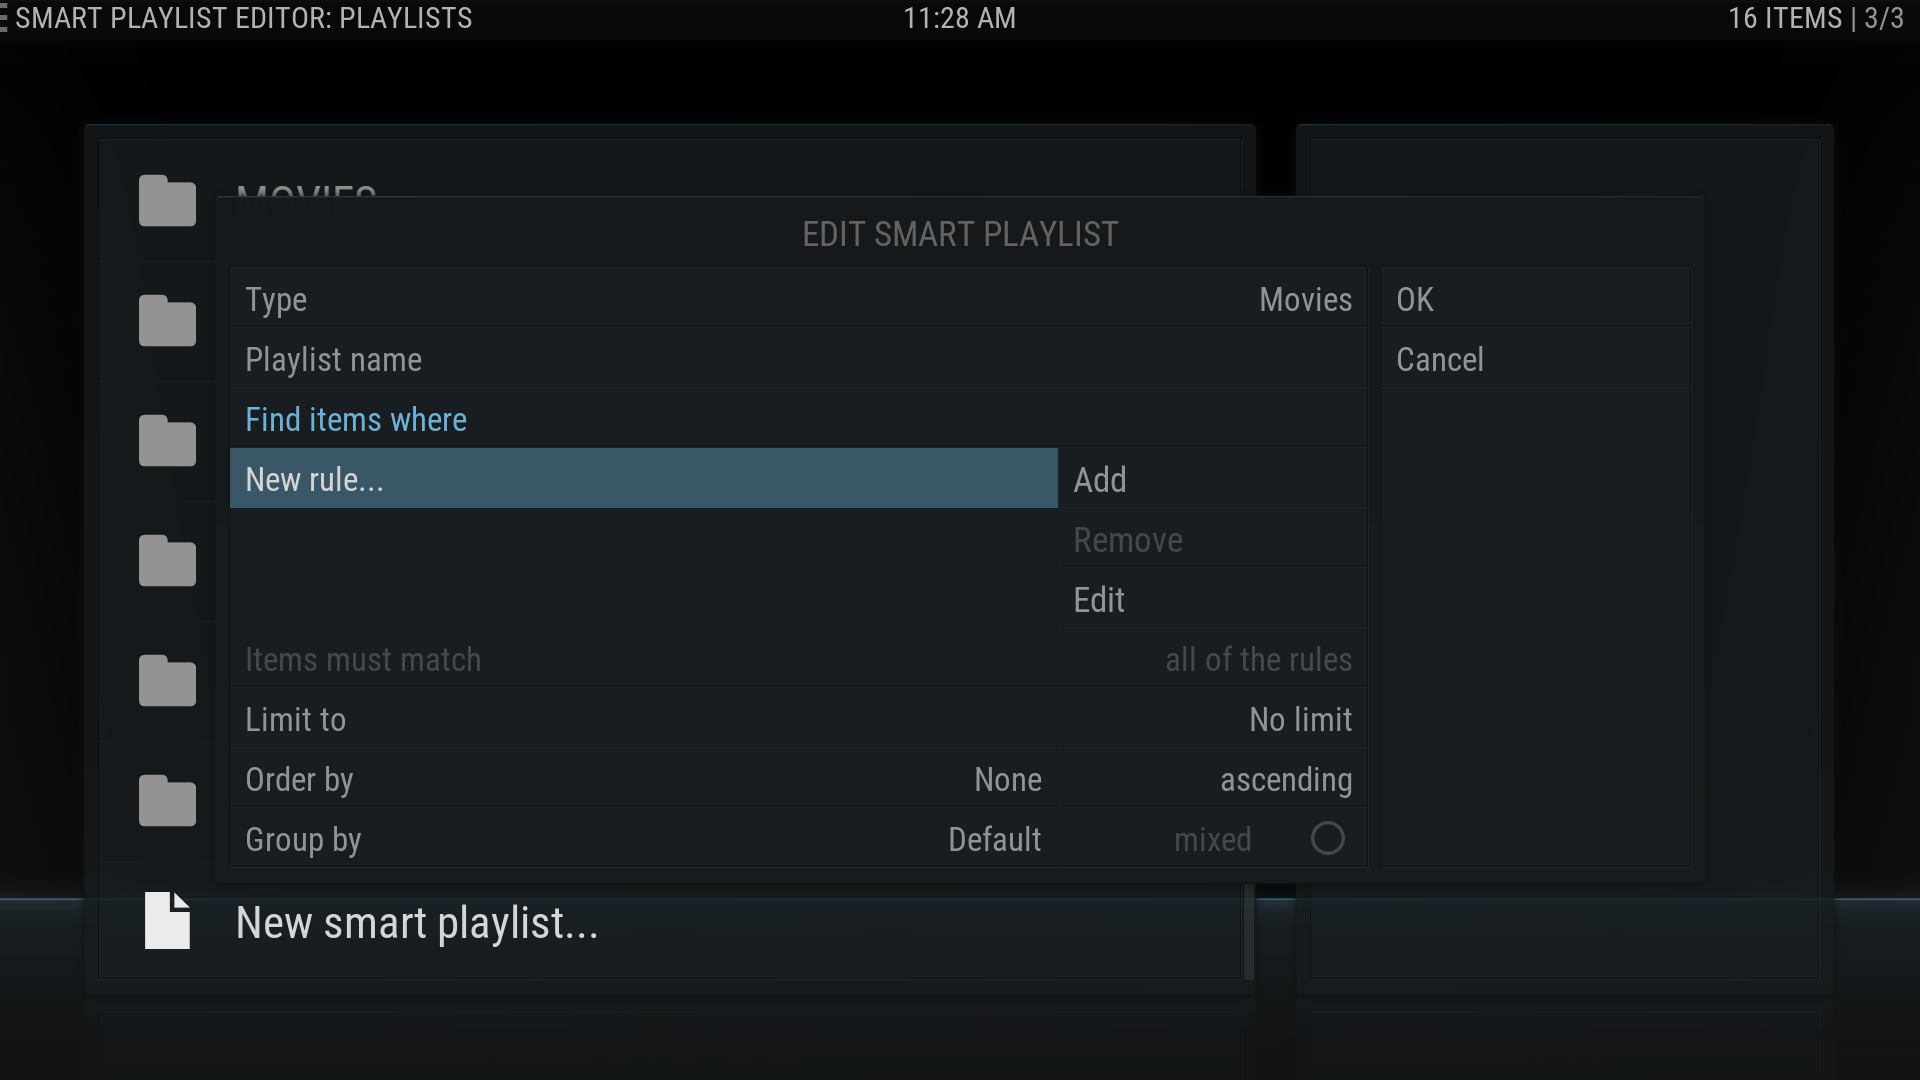 6. In the EDIT SMART PLAYLIST dialog box click on New rule….